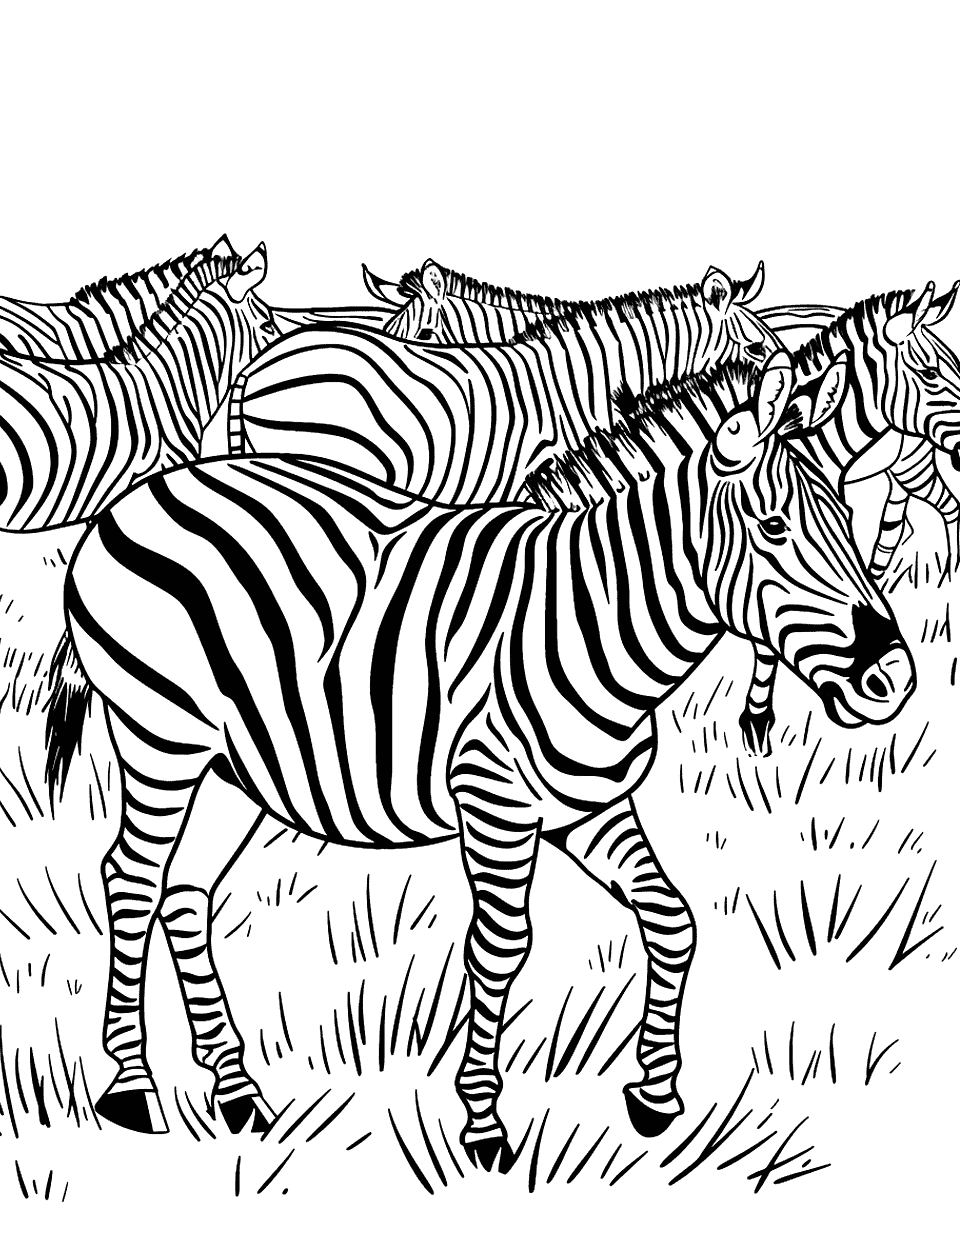 Zebra Herd on the Move Coloring Page - Several zebras moving together across a flat, grassy landscape.